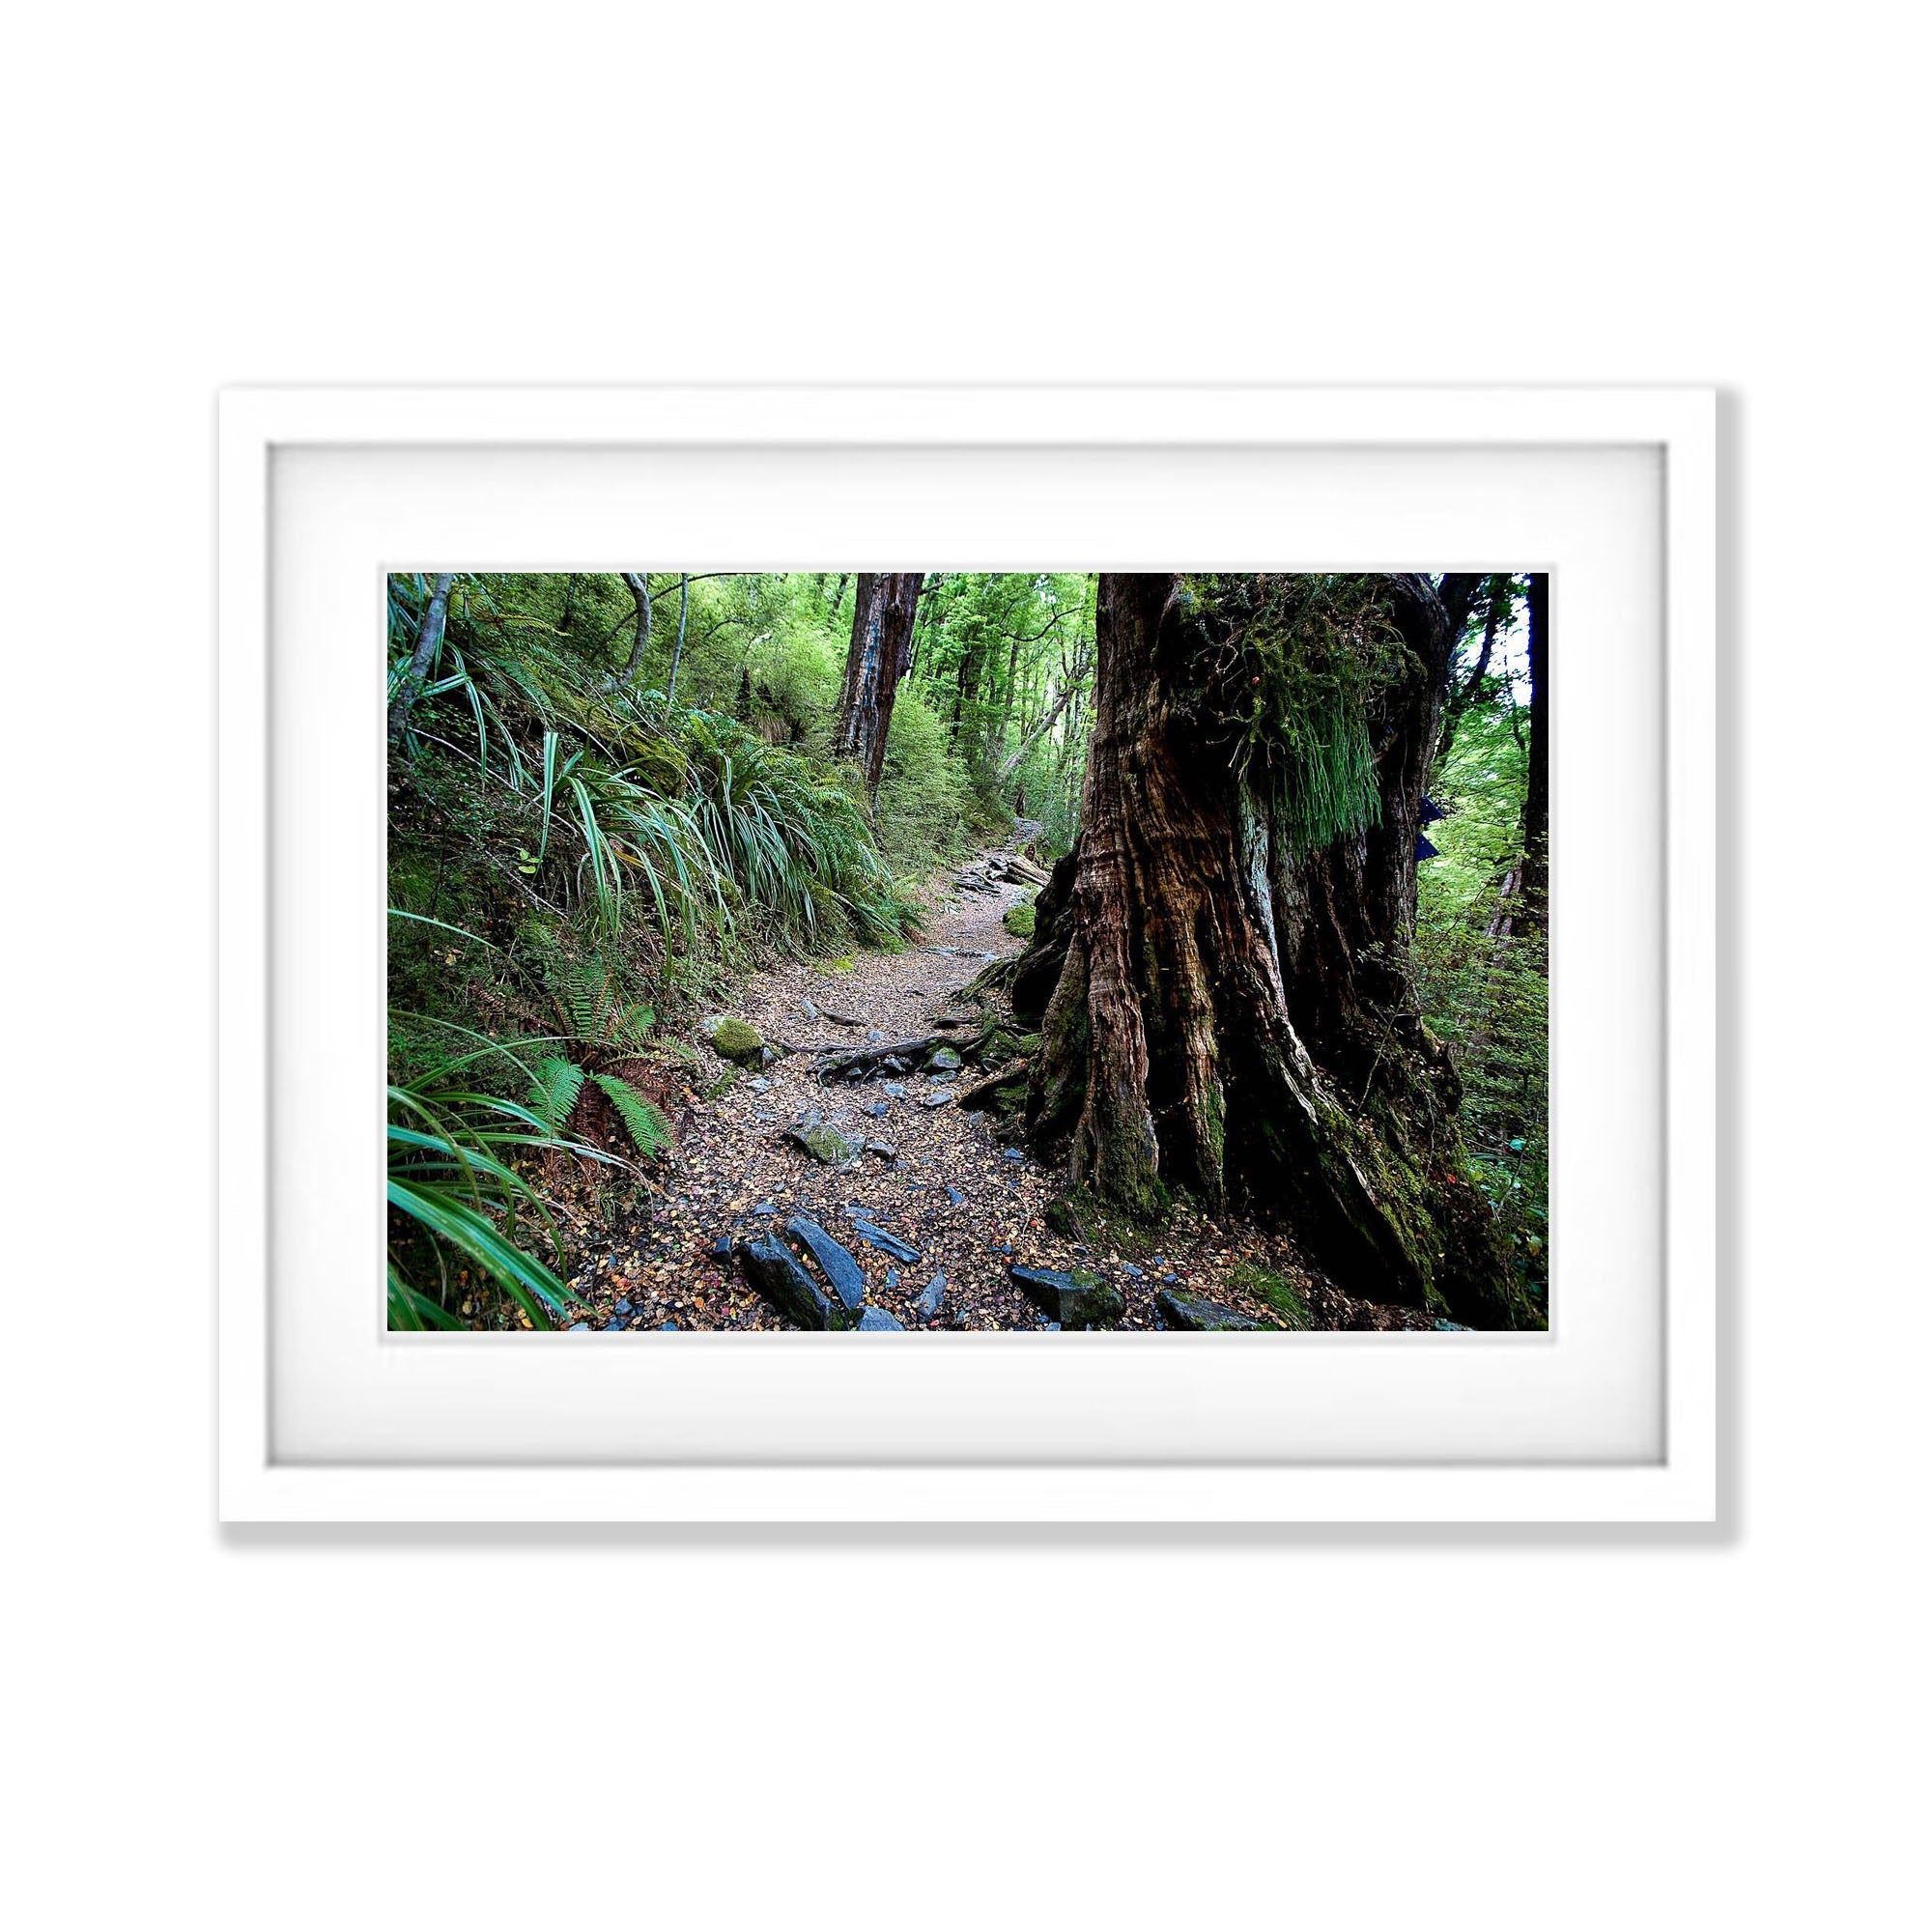 The Routeburn Track #3 - New Zealand